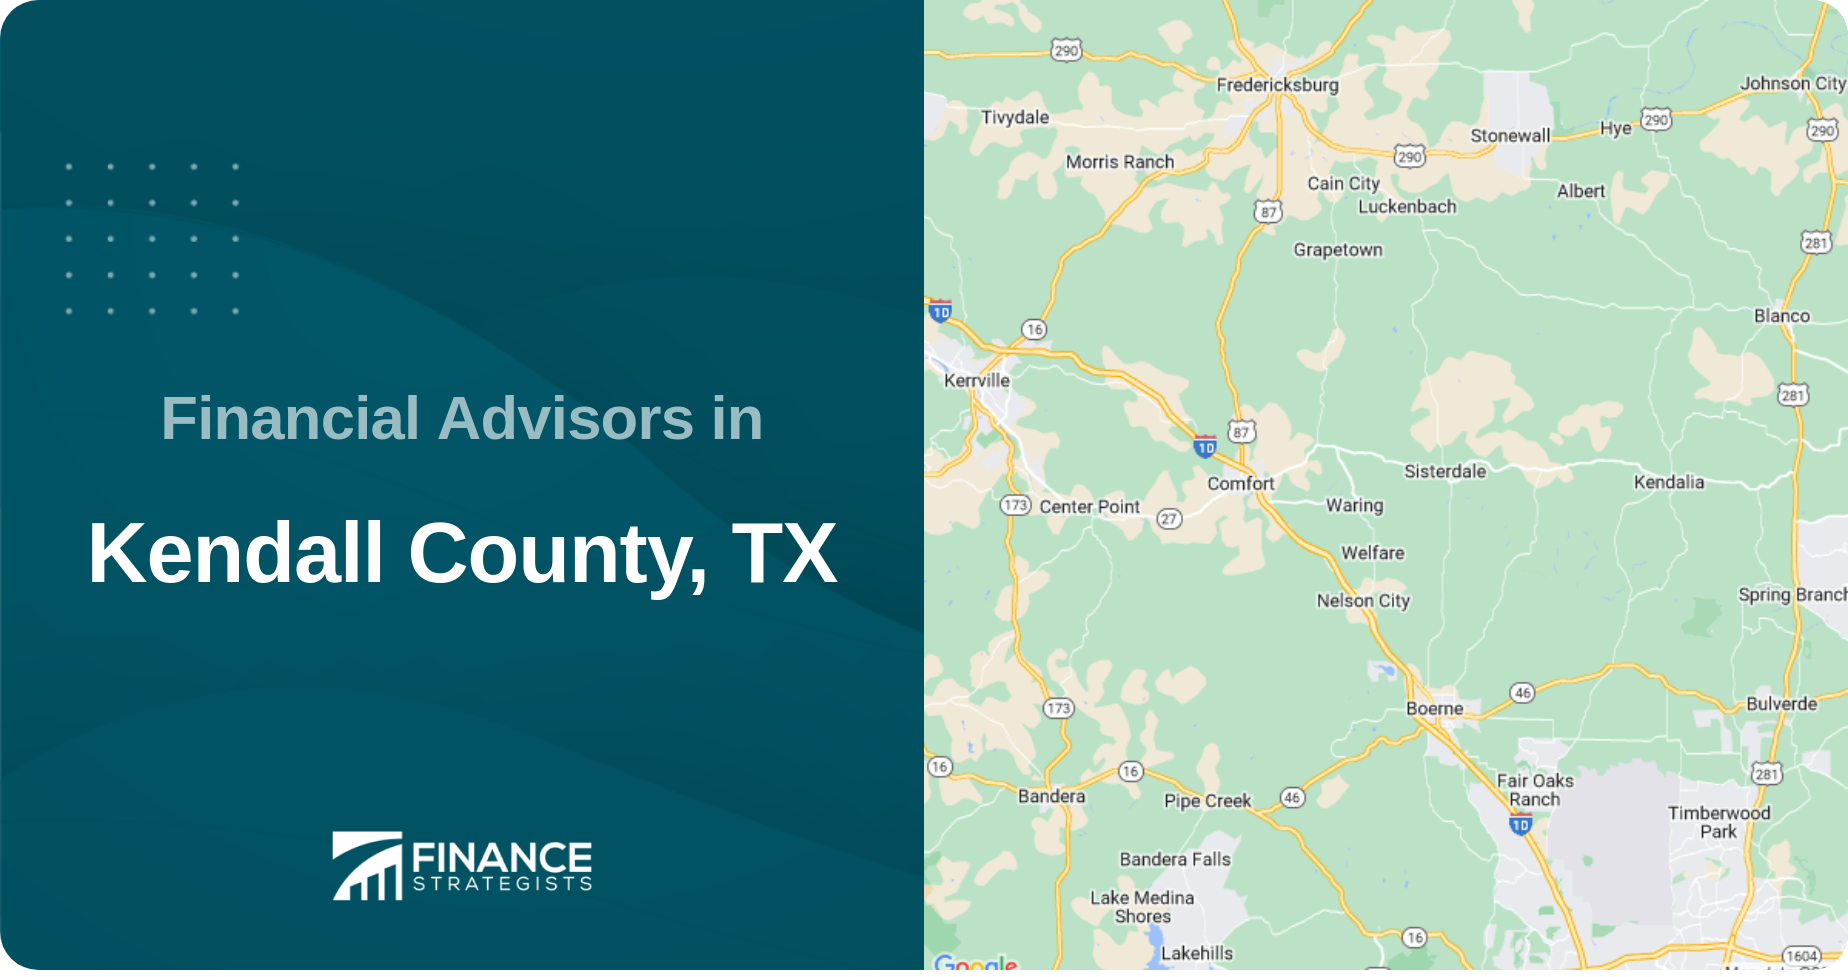 Financial Advisors in Kendall County, TX